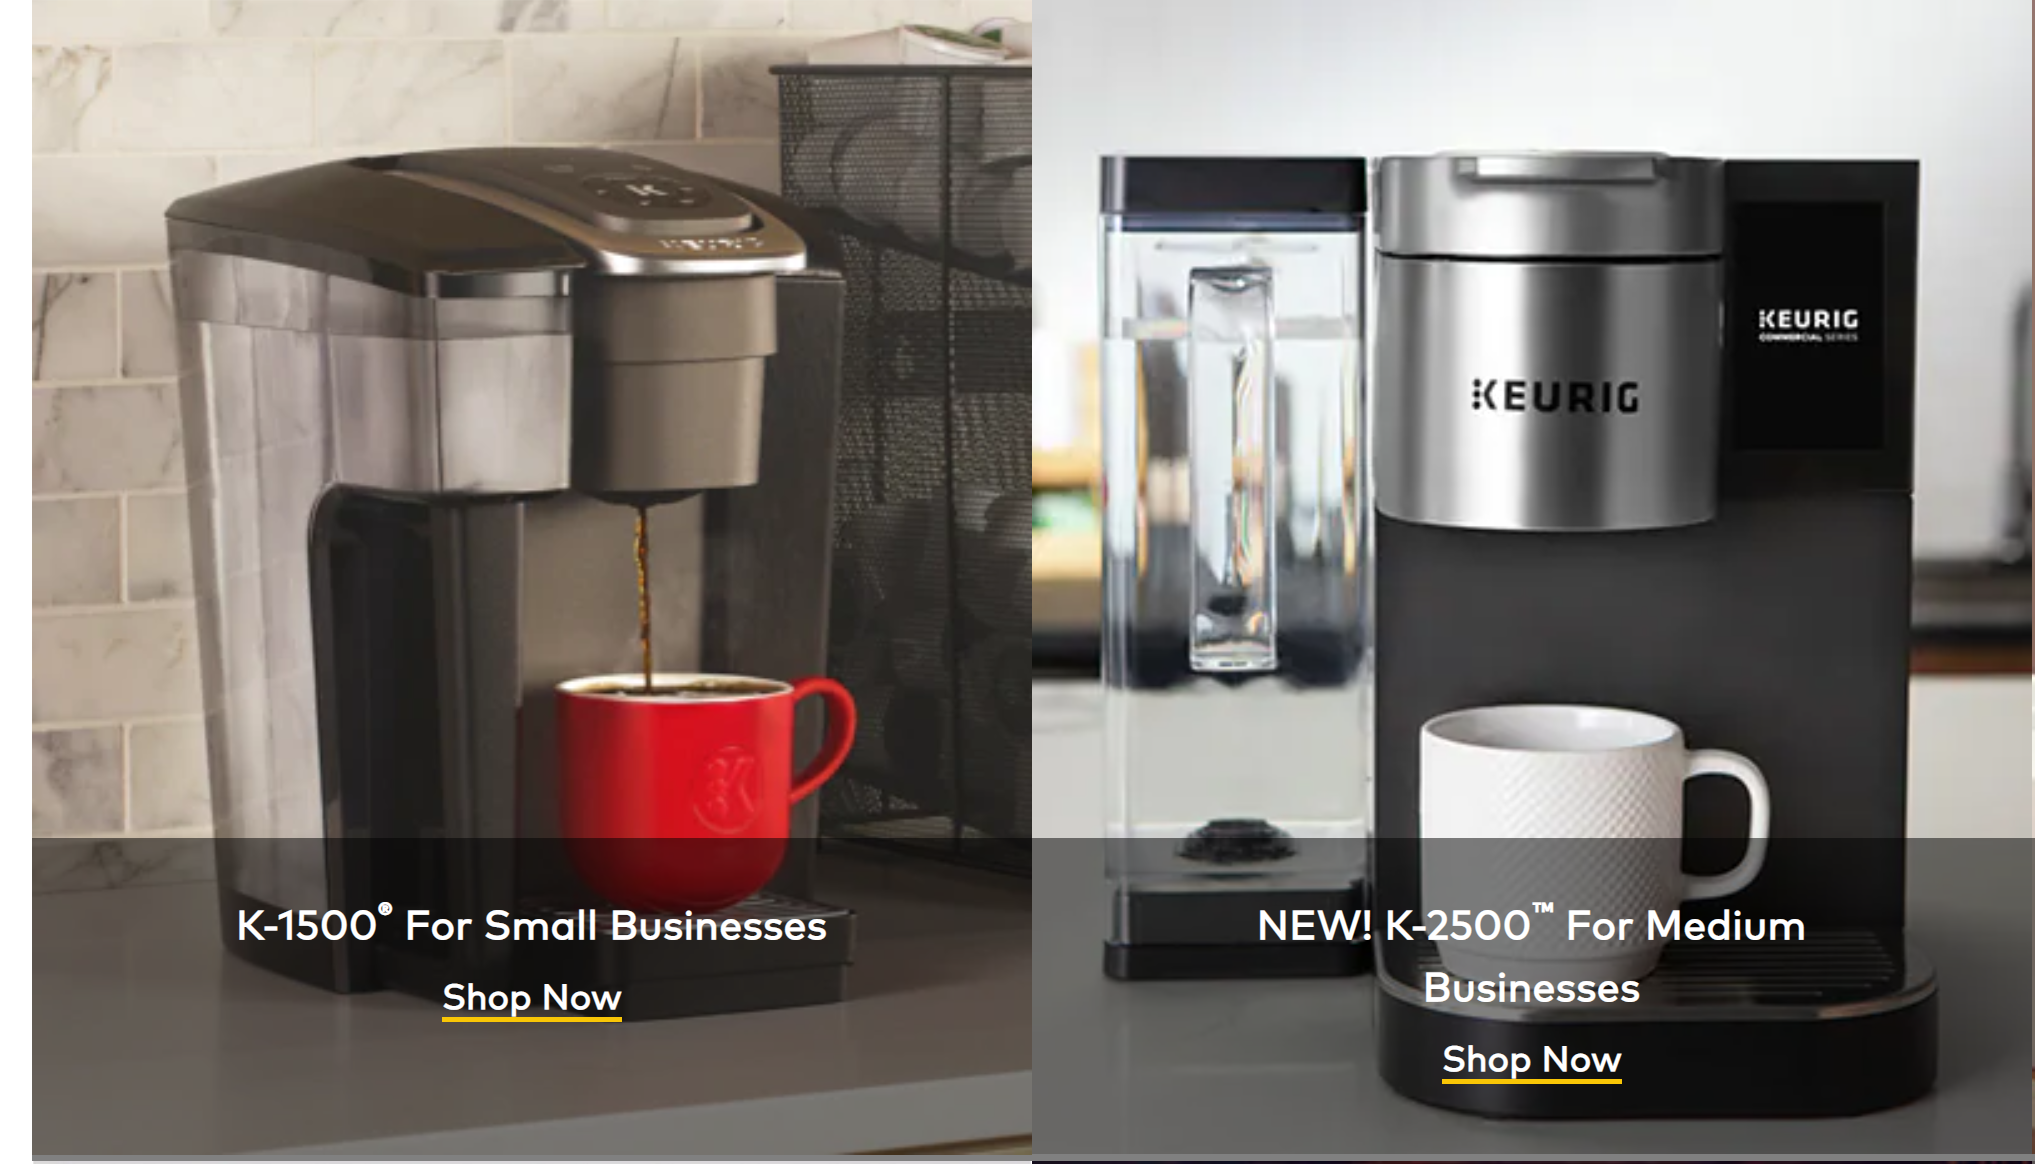 Keurig – brewing system for home and commercial purposes